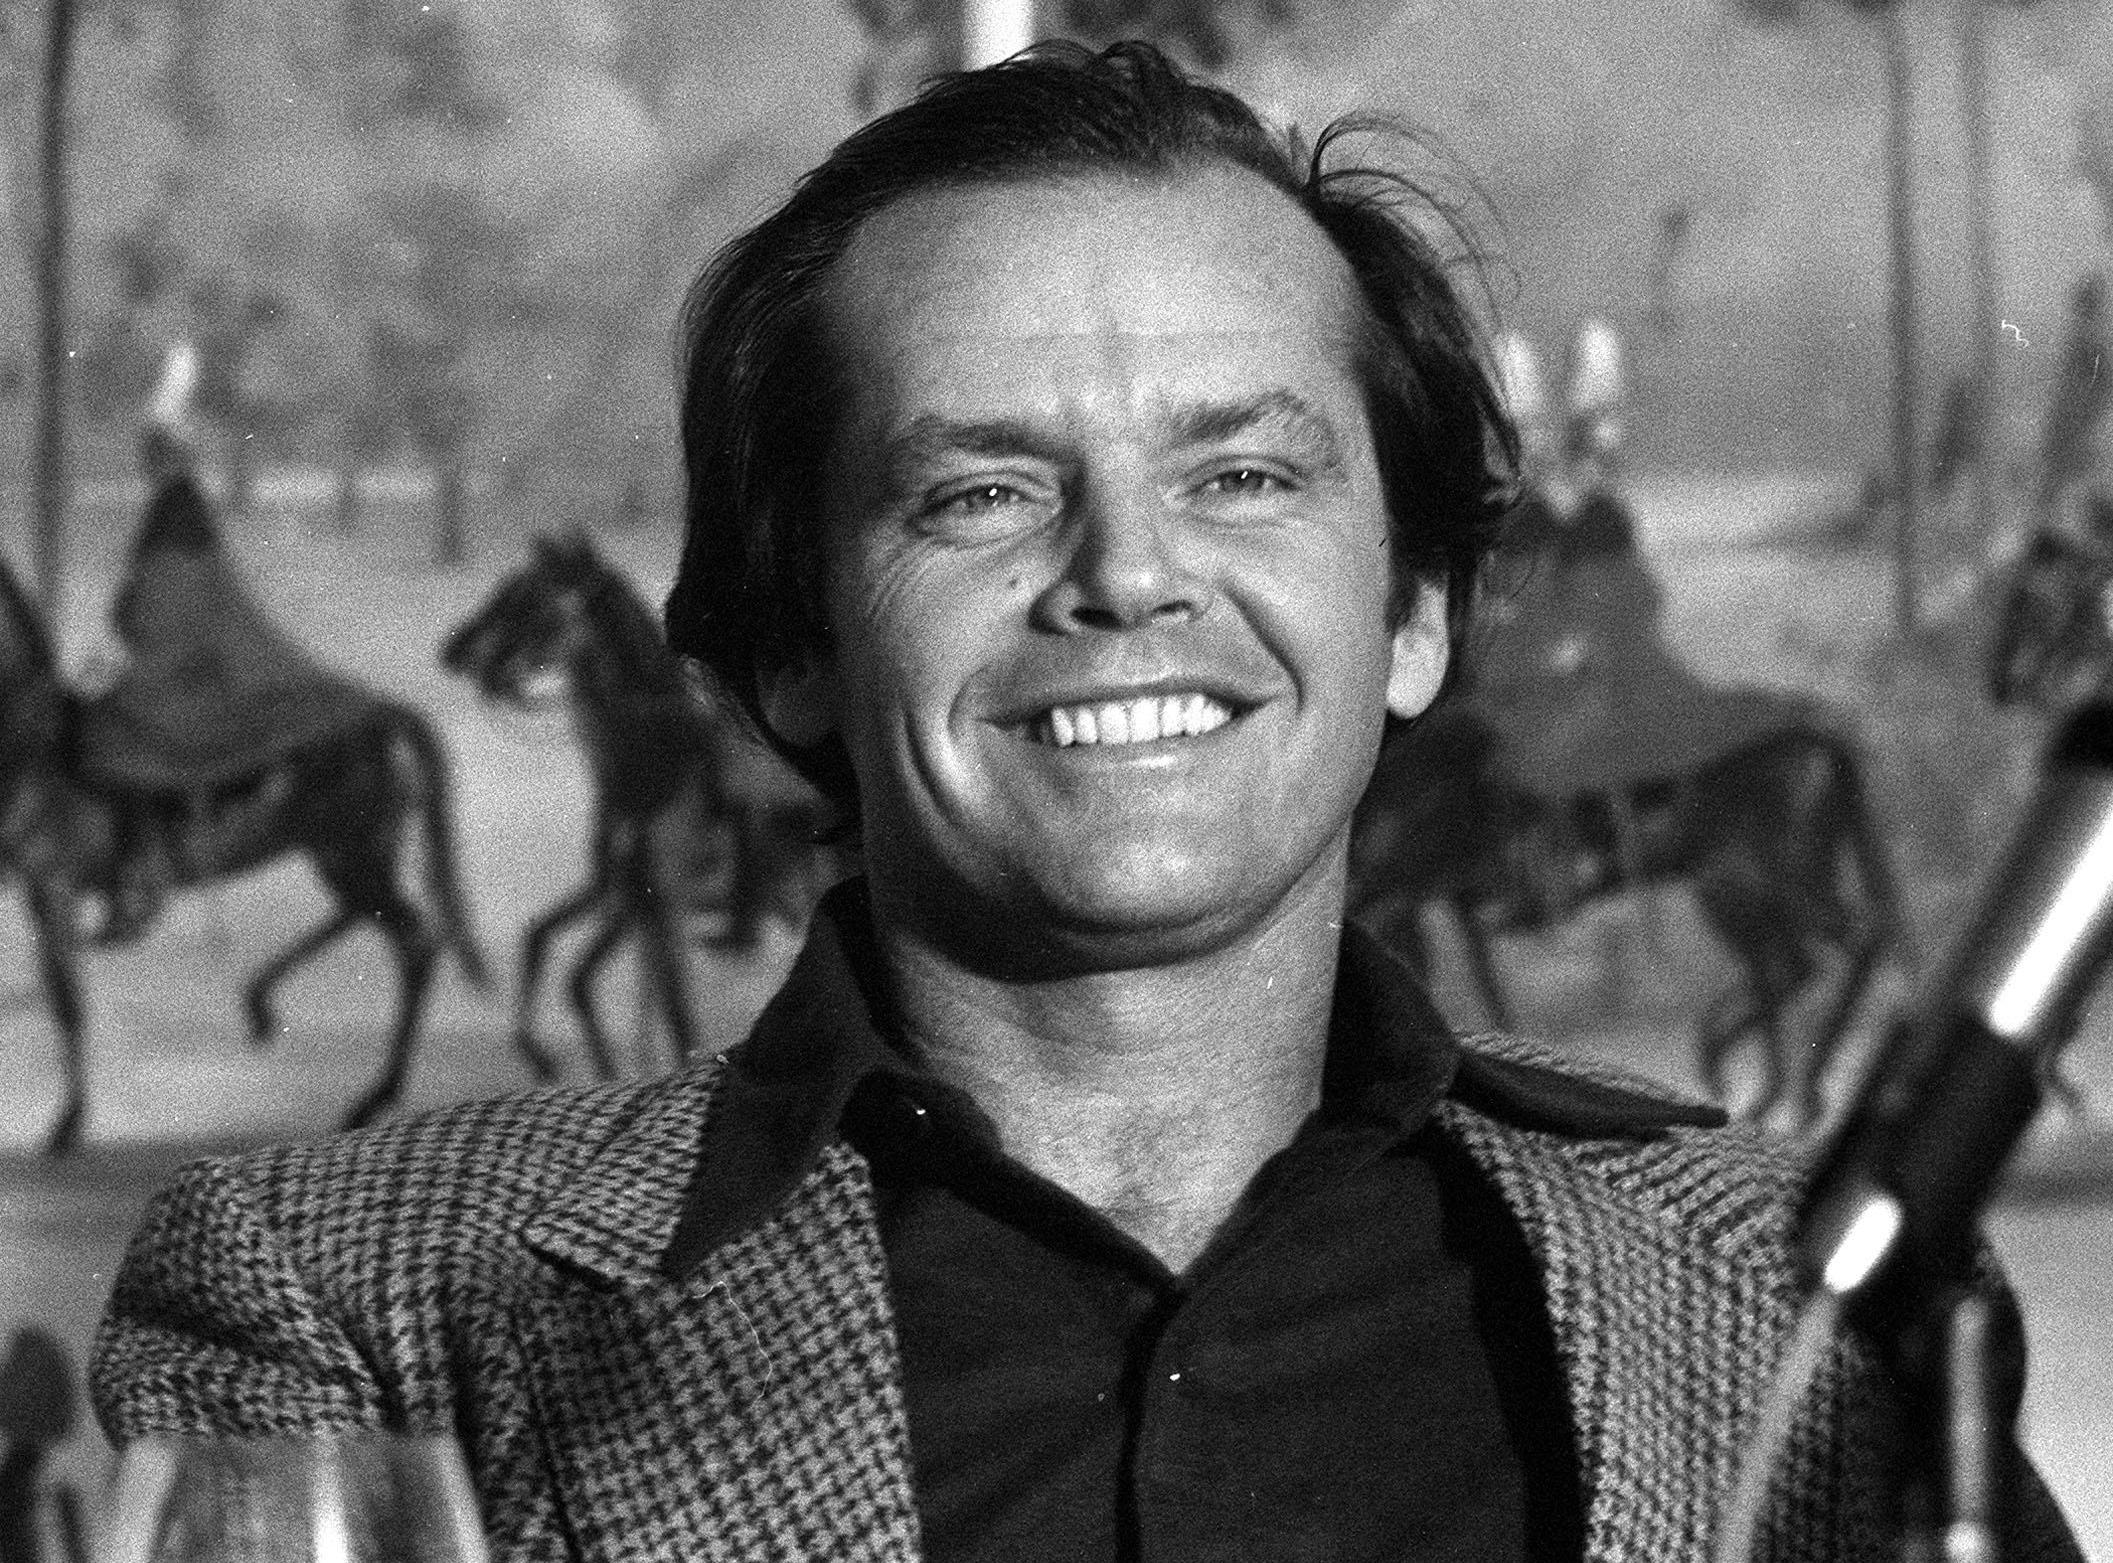 He's Seriously Ambitions Jack Nicholson: A Life in Pictures Purple Clo...